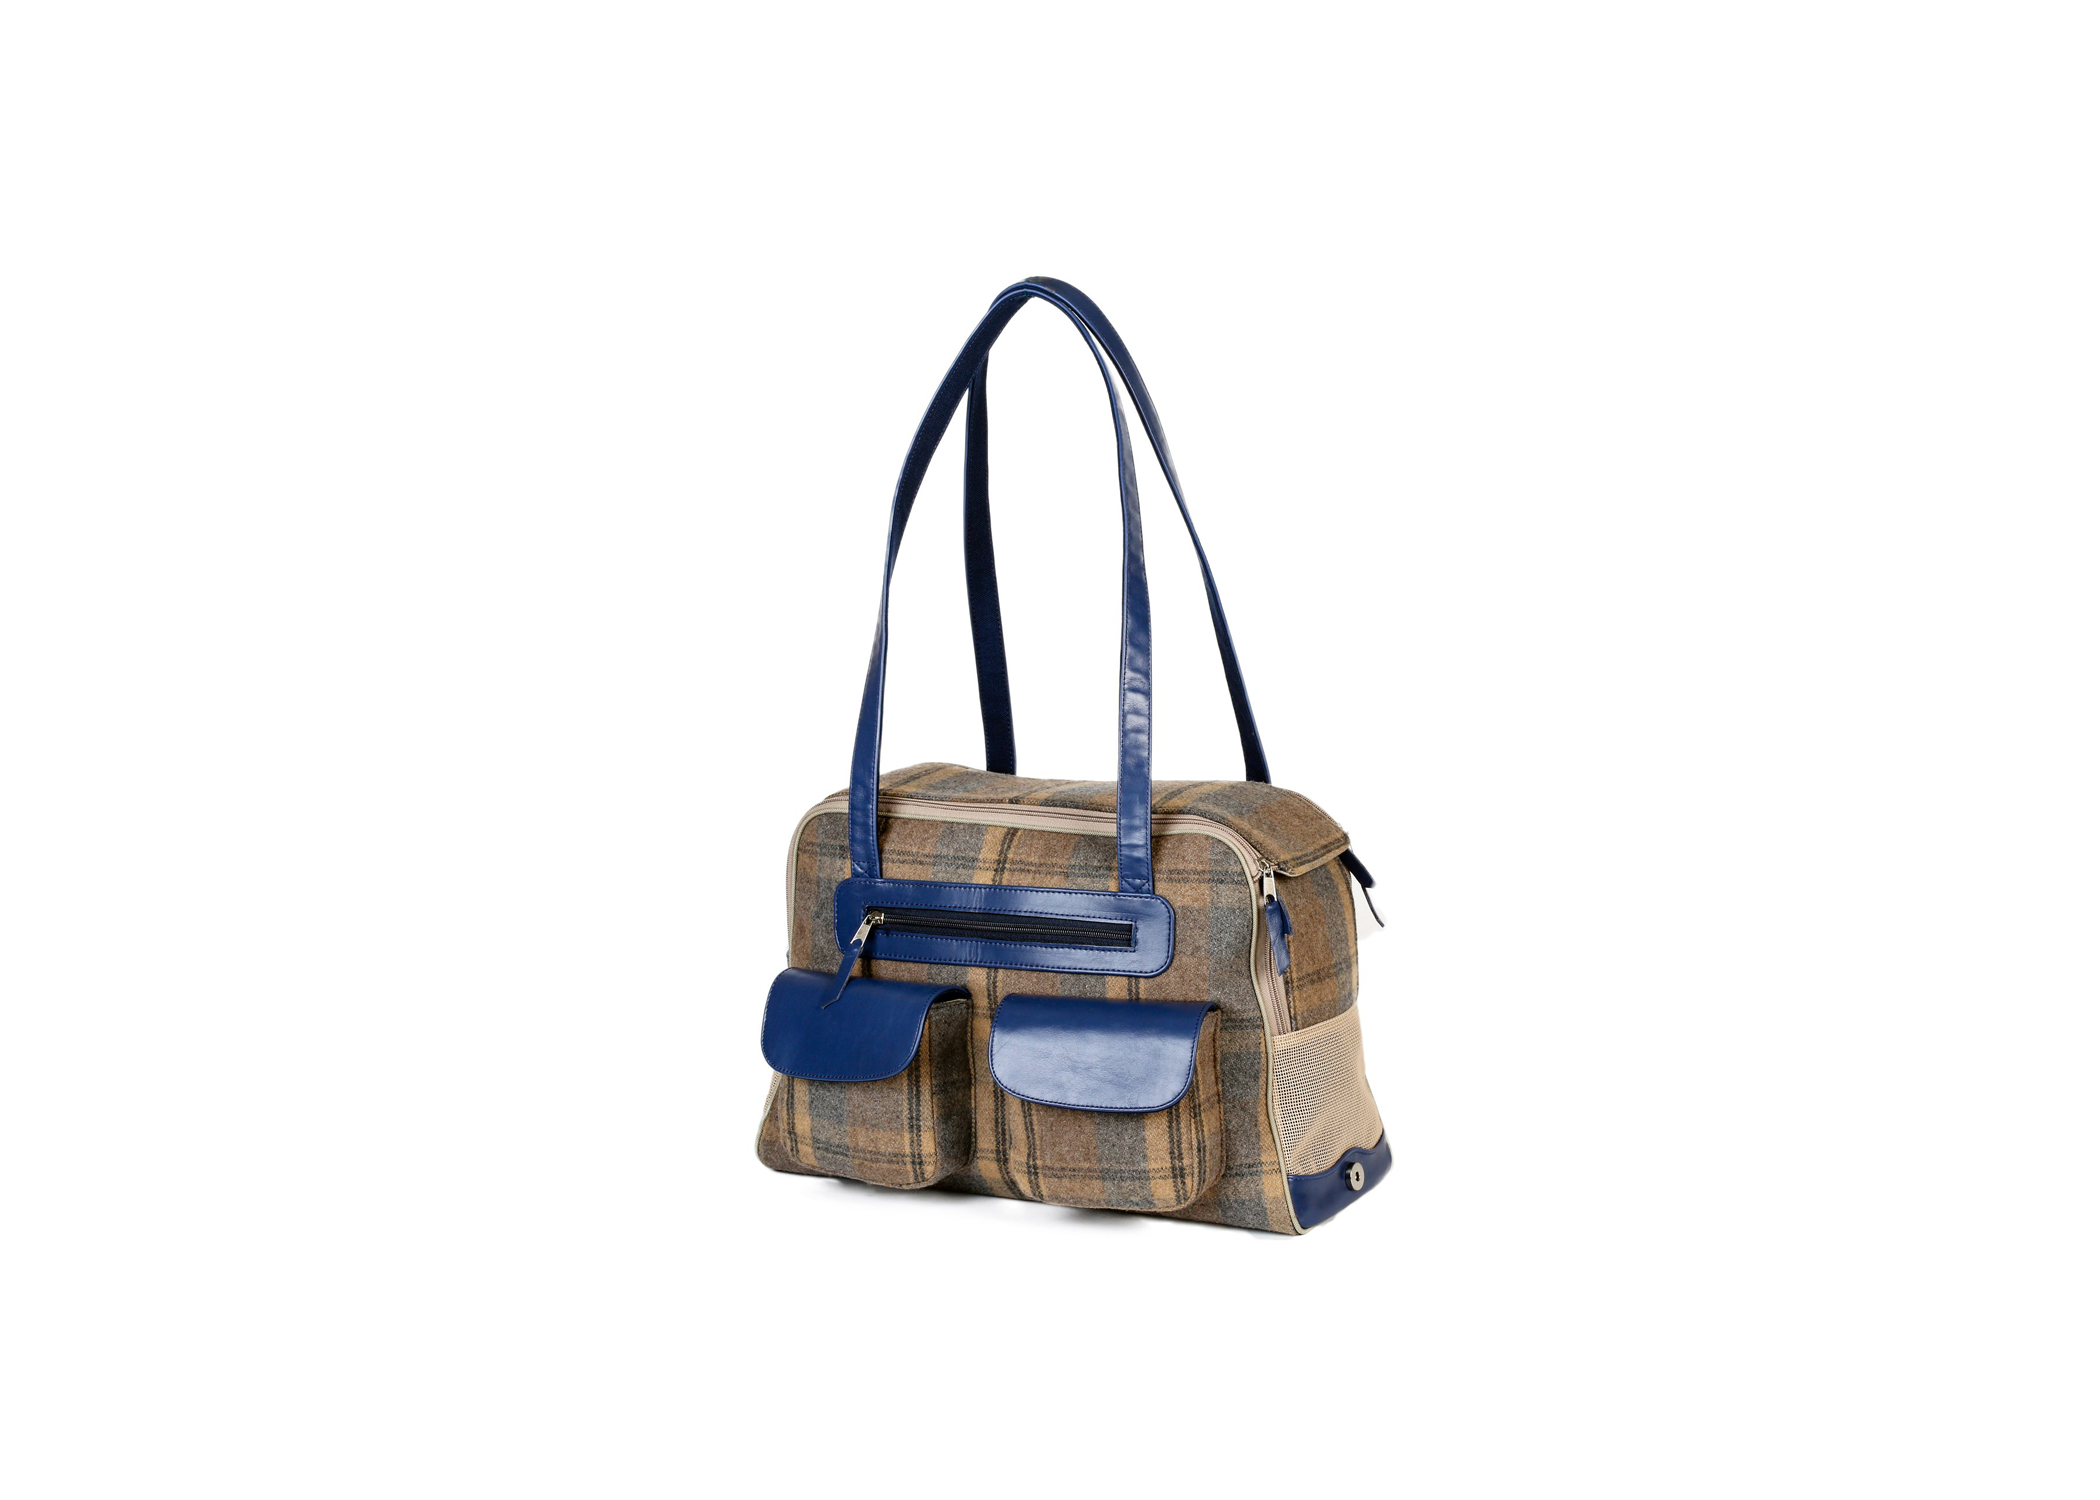   Canine Styles Blue and Plaid Carrier   